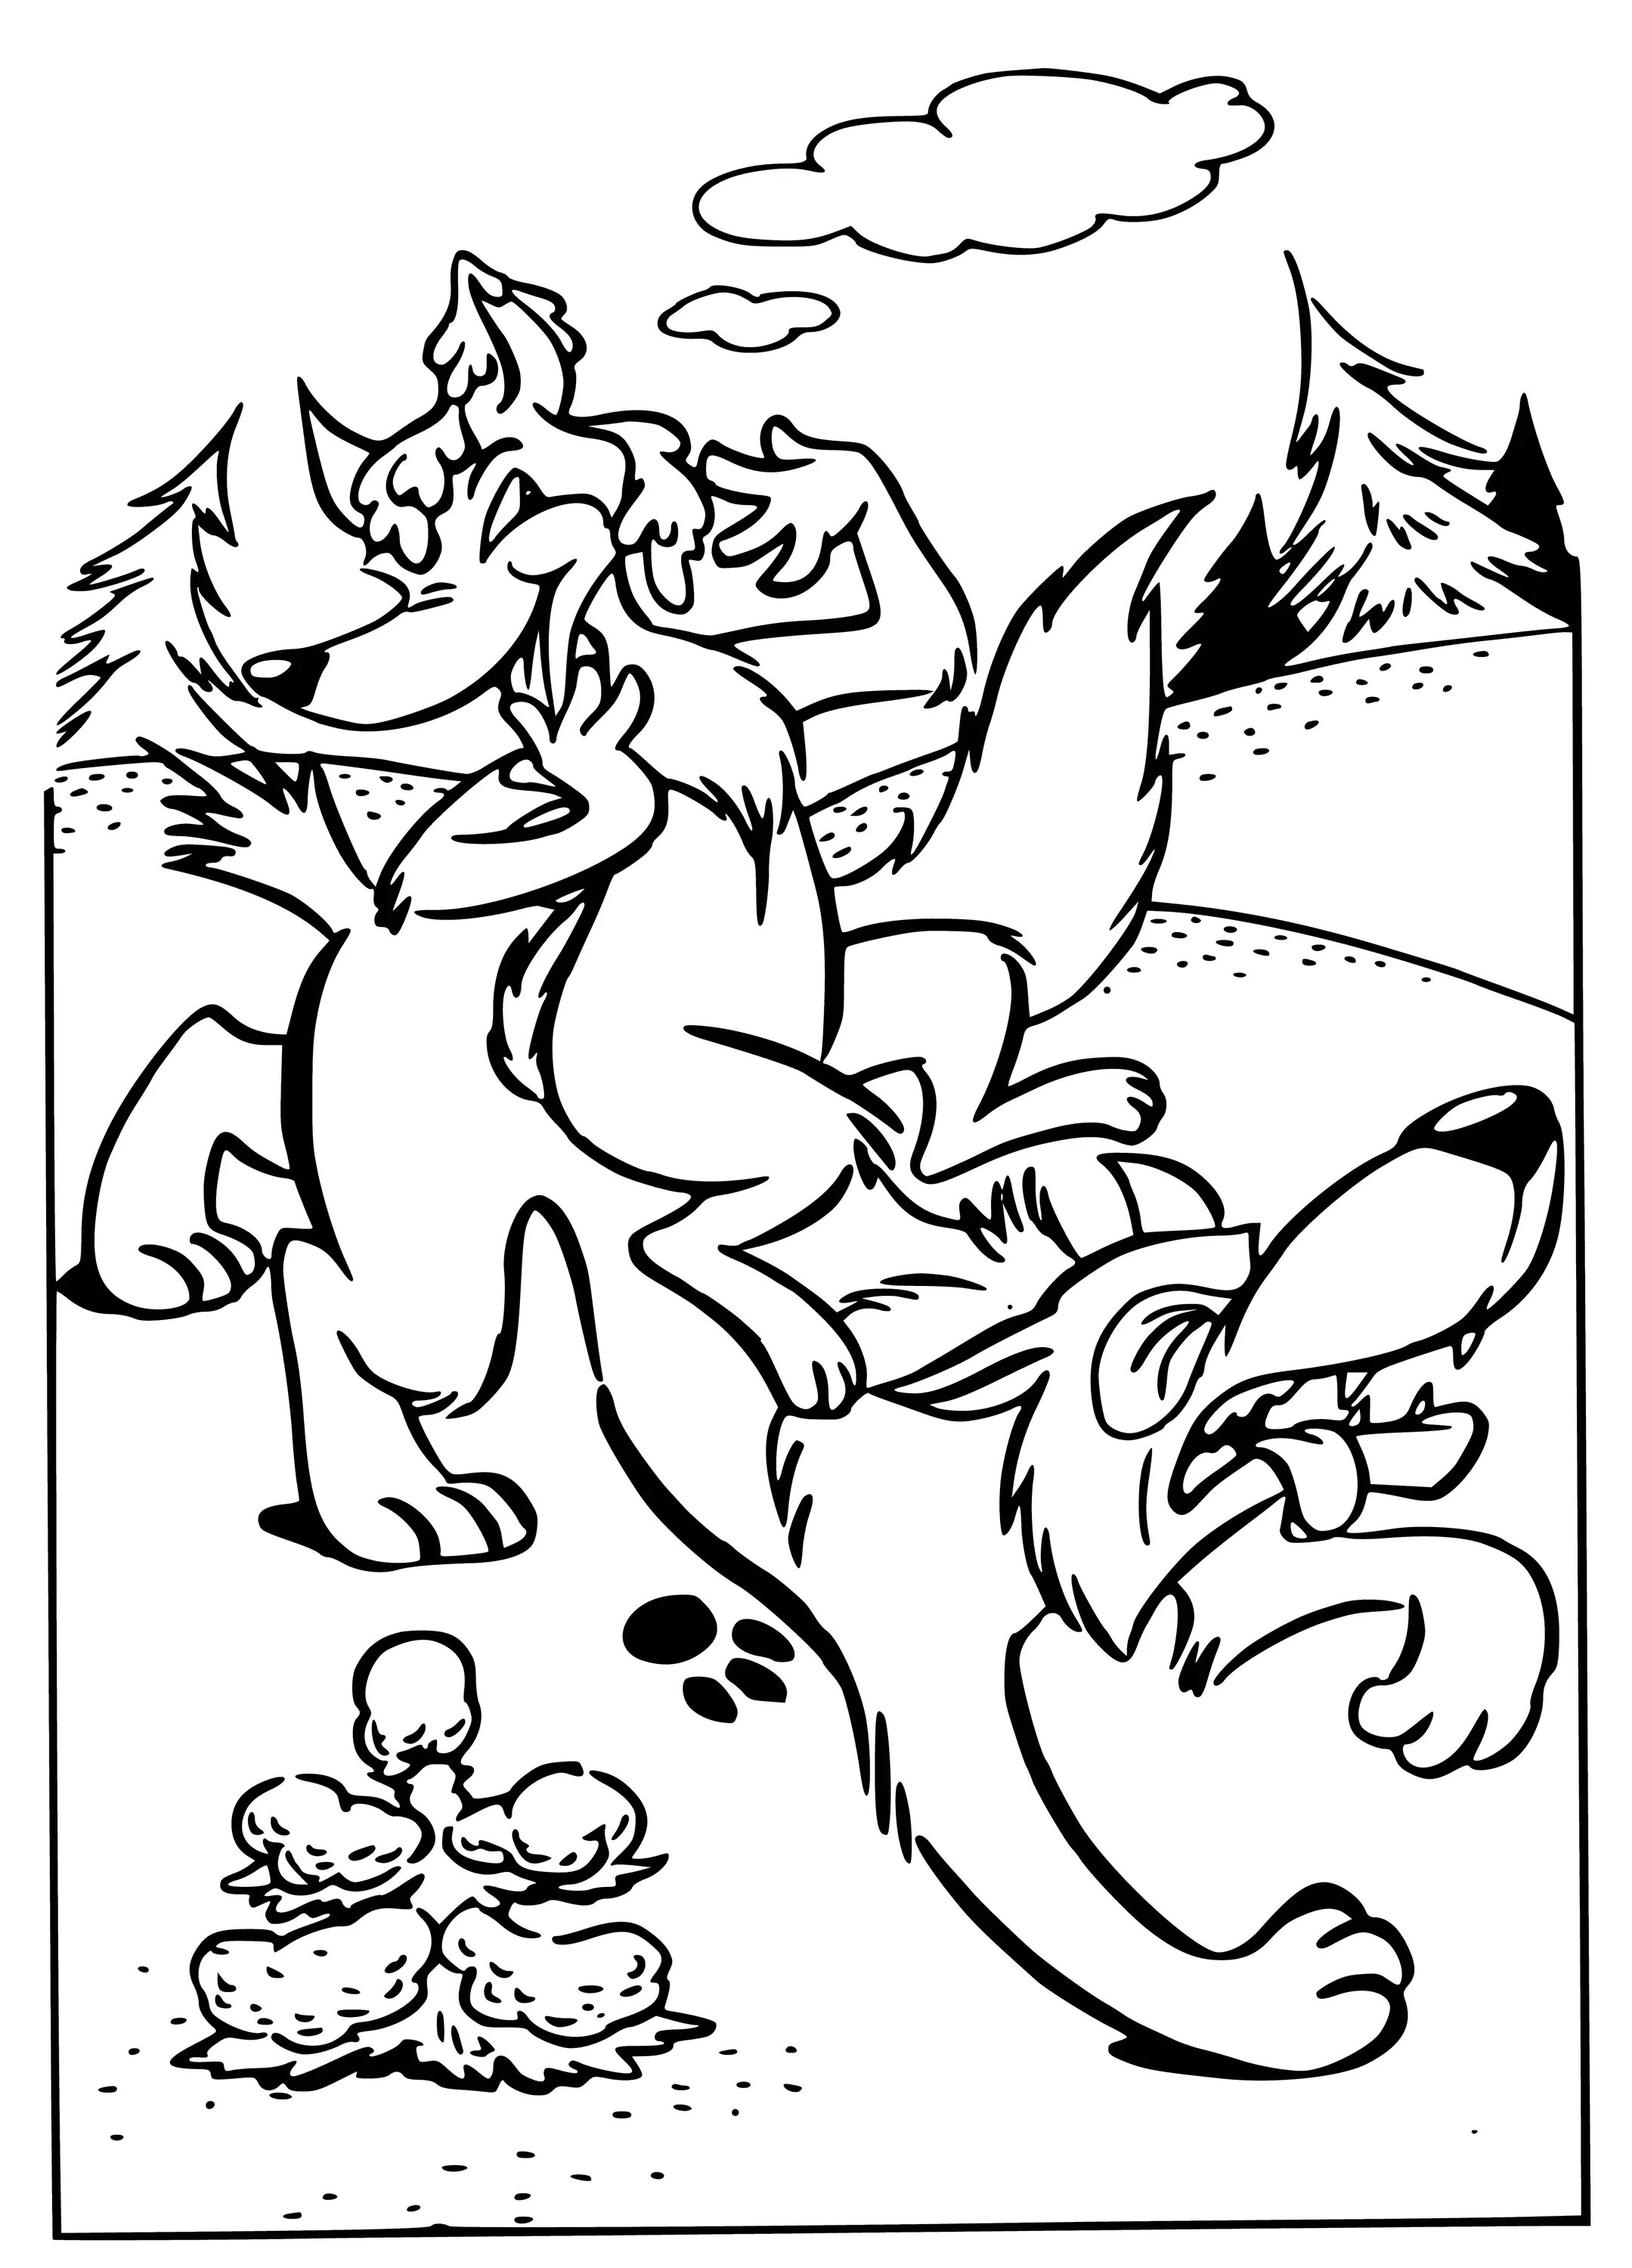 Magic fox and wolf coloring book for kids